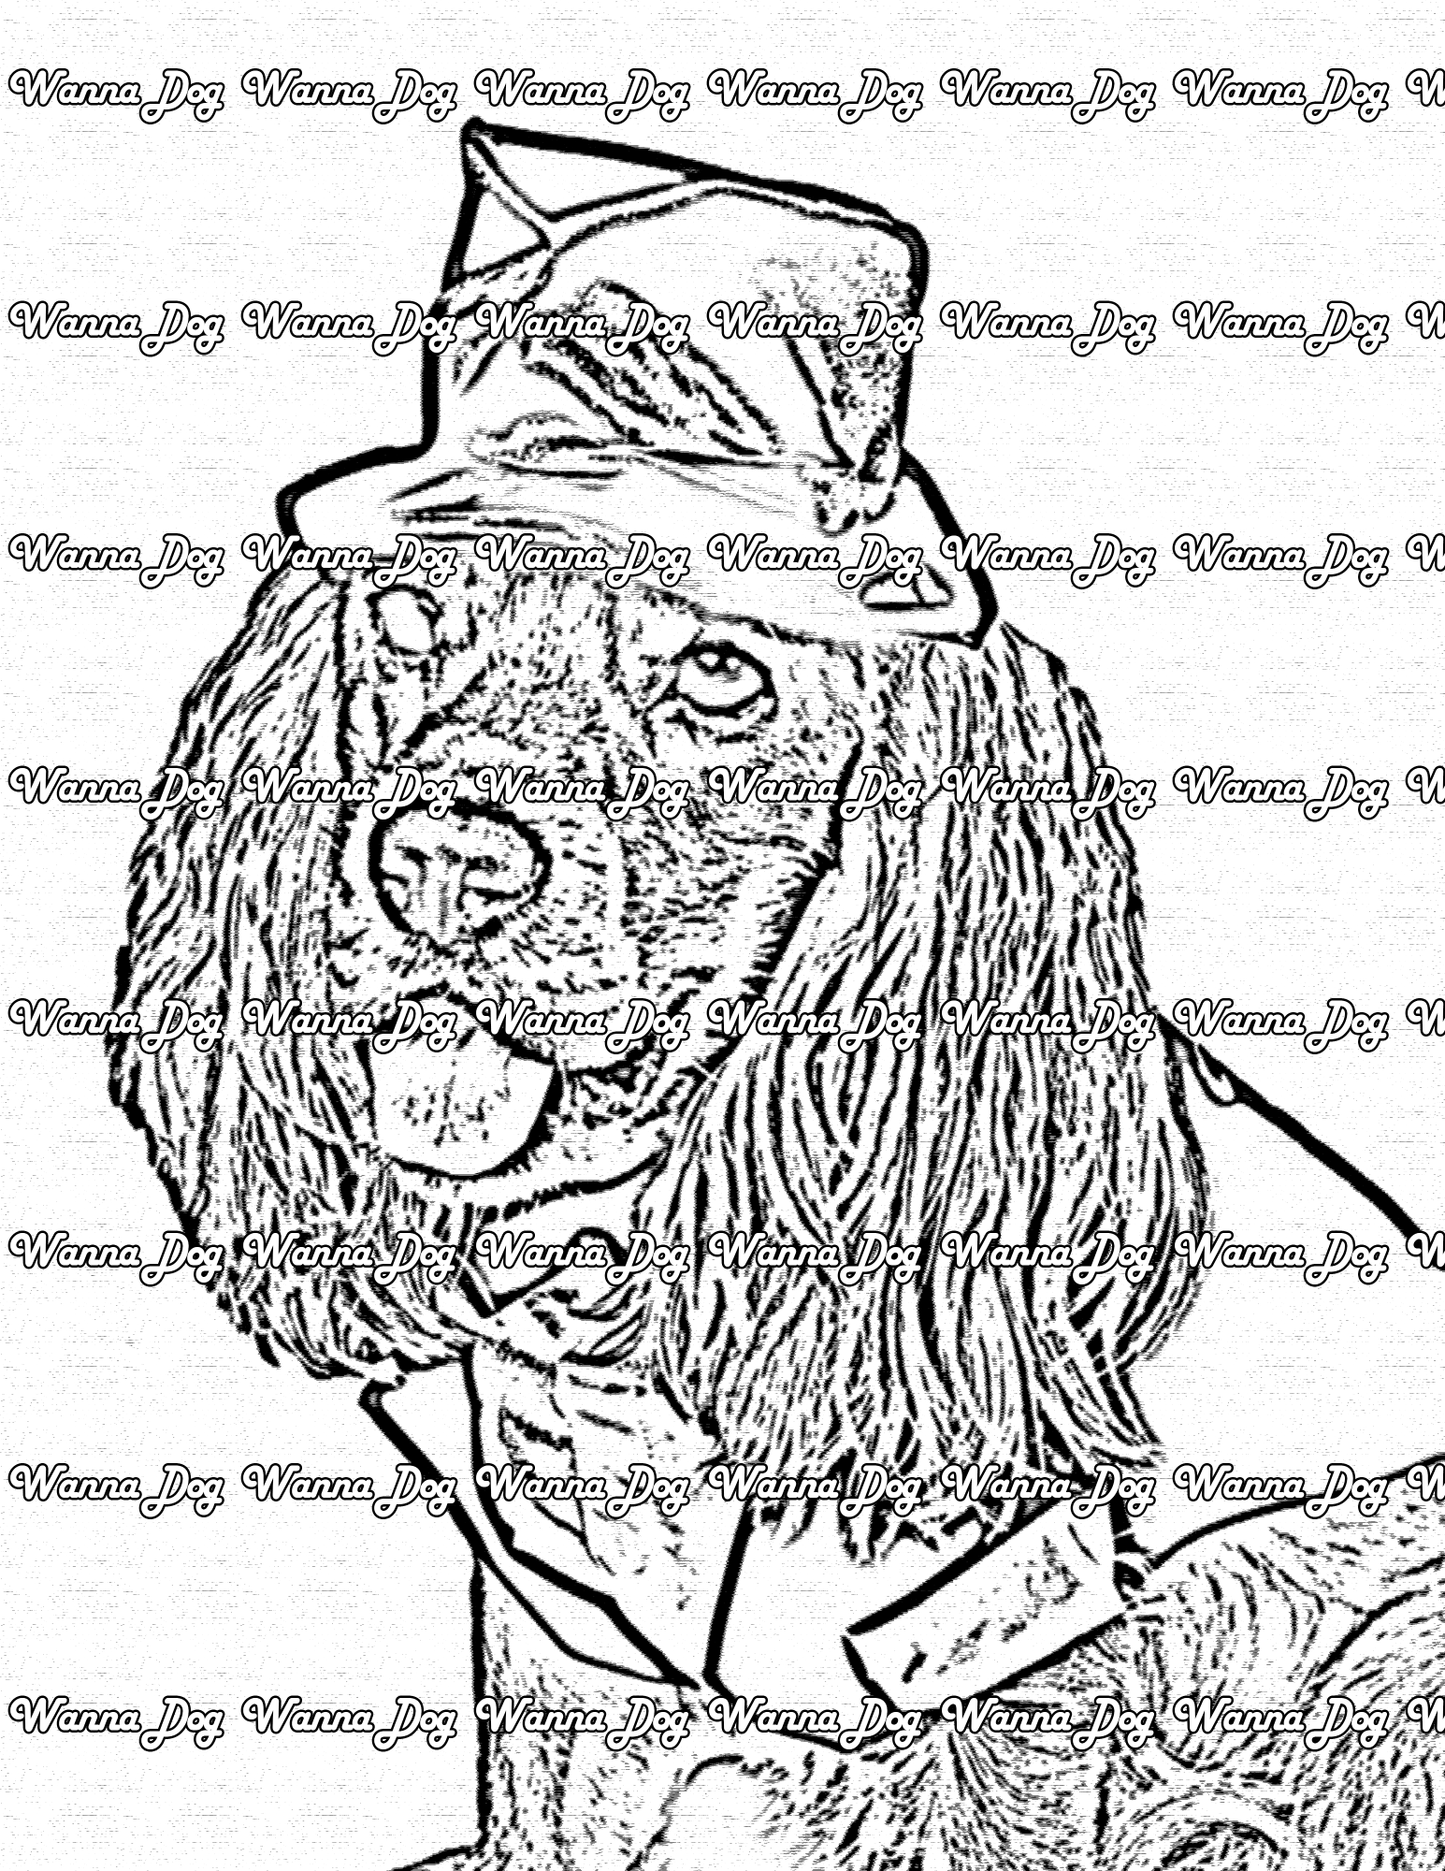 Cocker Spaniel Coloring Pages of a Cocker Spaniel wearing a top hat